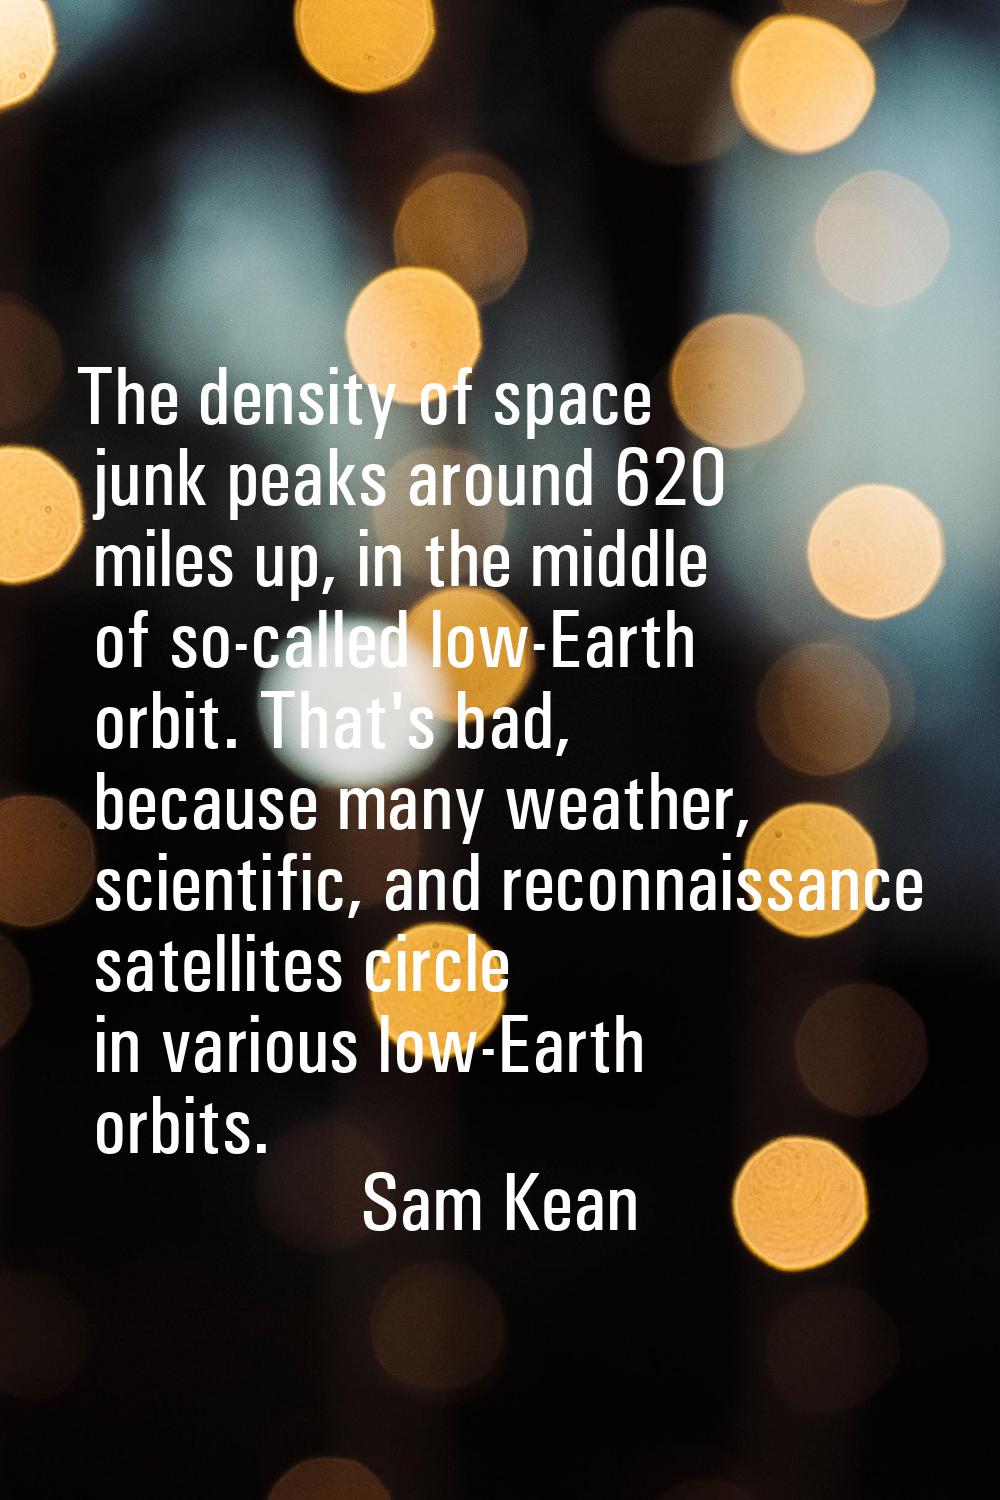 The density of space junk peaks around 620 miles up, in the middle of so-called low-Earth orbit. Th